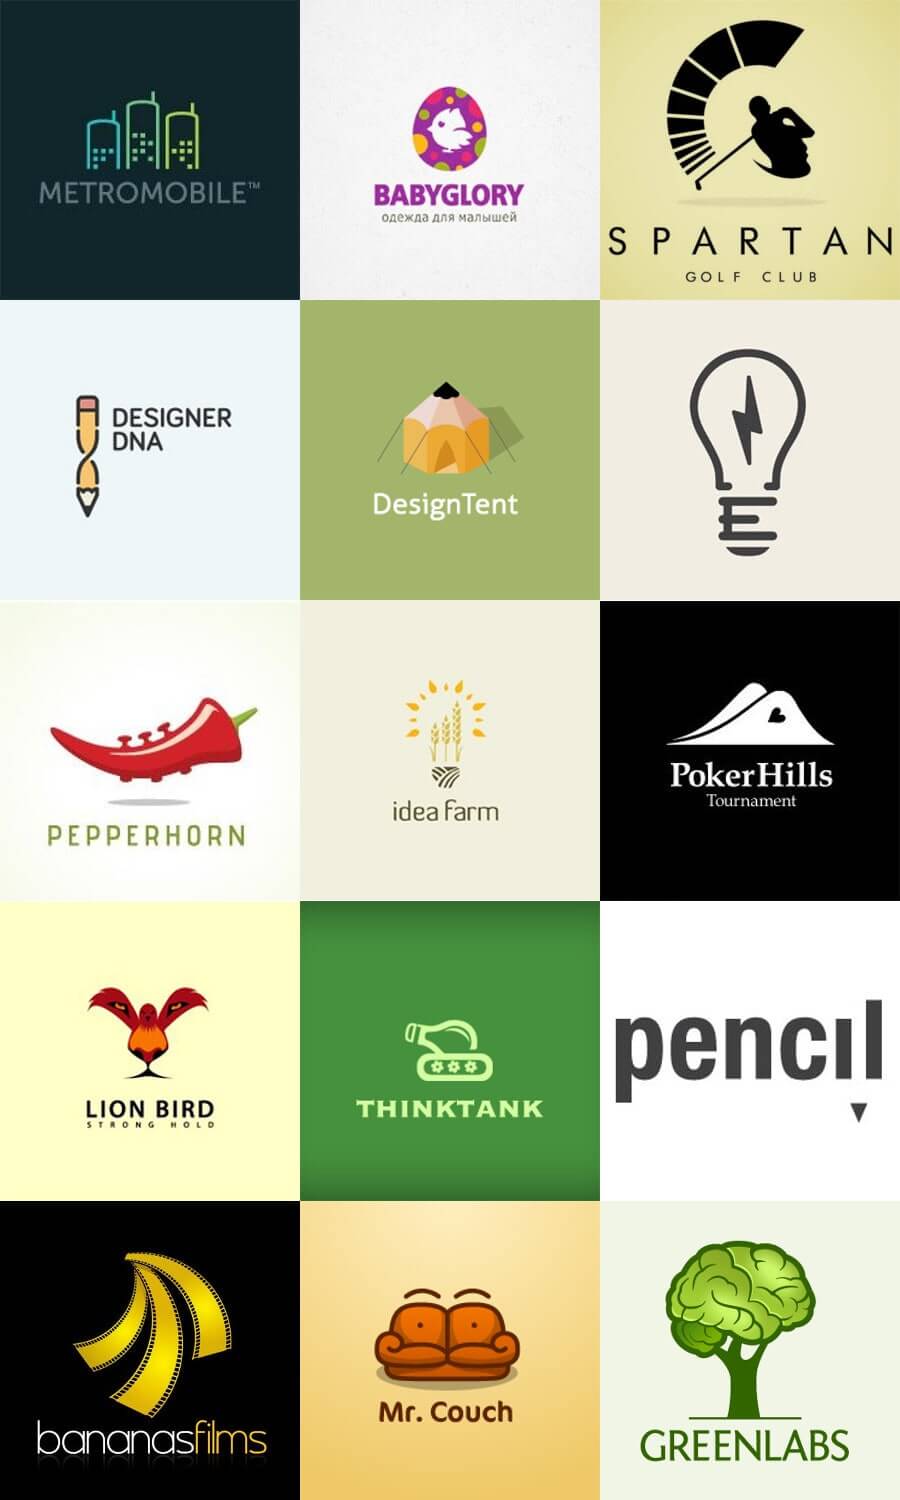 Clever logos